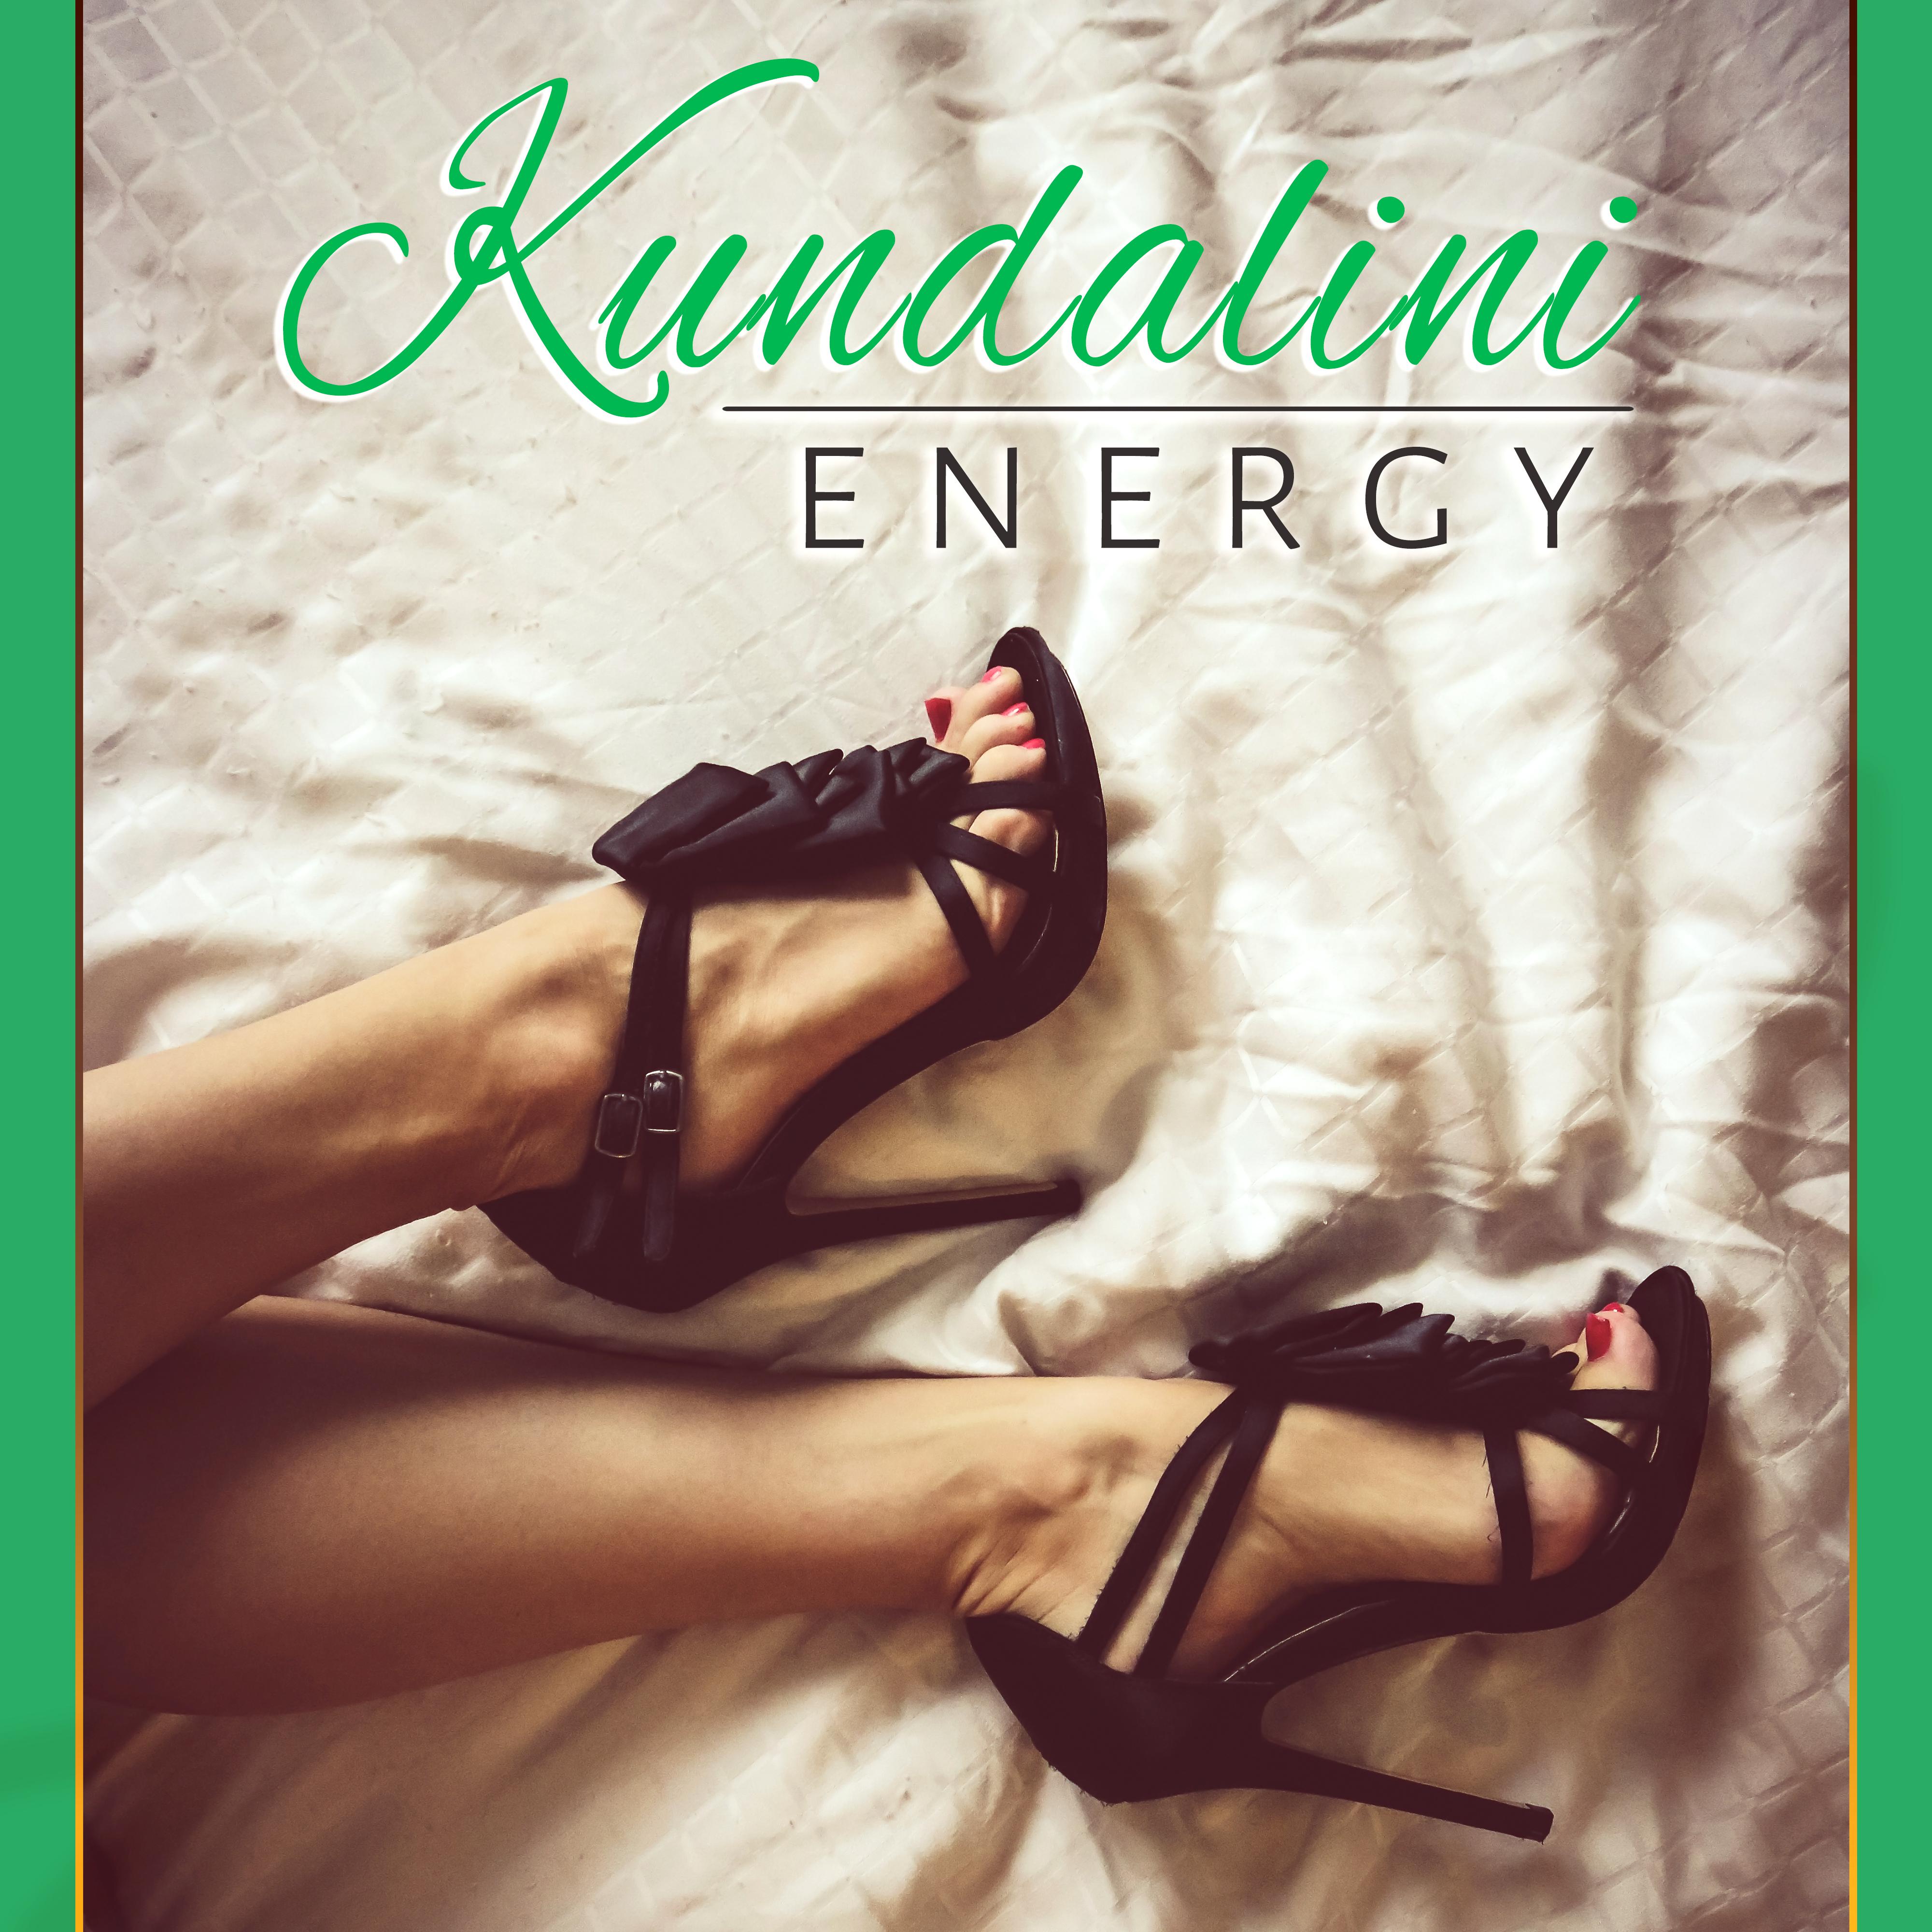 Kundalini Energy  Sensual Tantric New Age Songs for Intimate Moments,  Relaxation  Meditation, Kamasutra, Spiritual Practice, Passion  Pleasure, Love Making Background Music